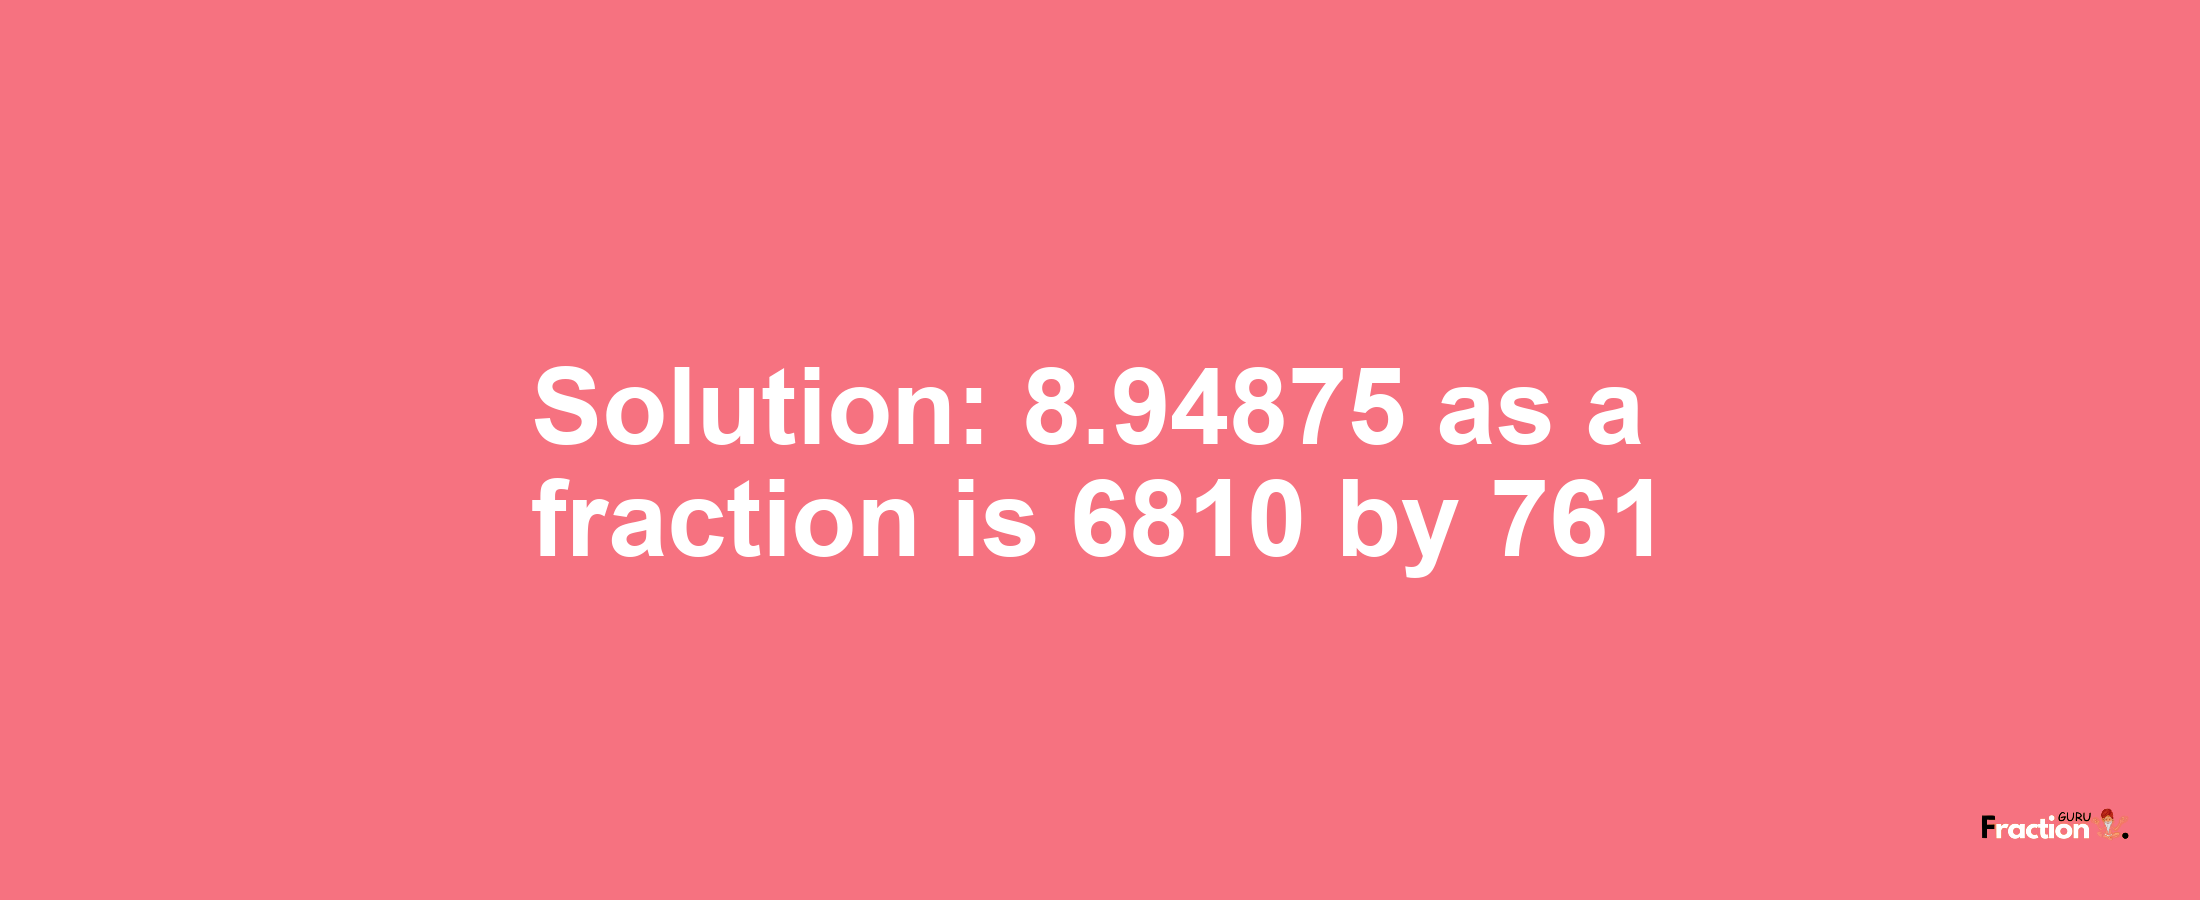 Solution:8.94875 as a fraction is 6810/761